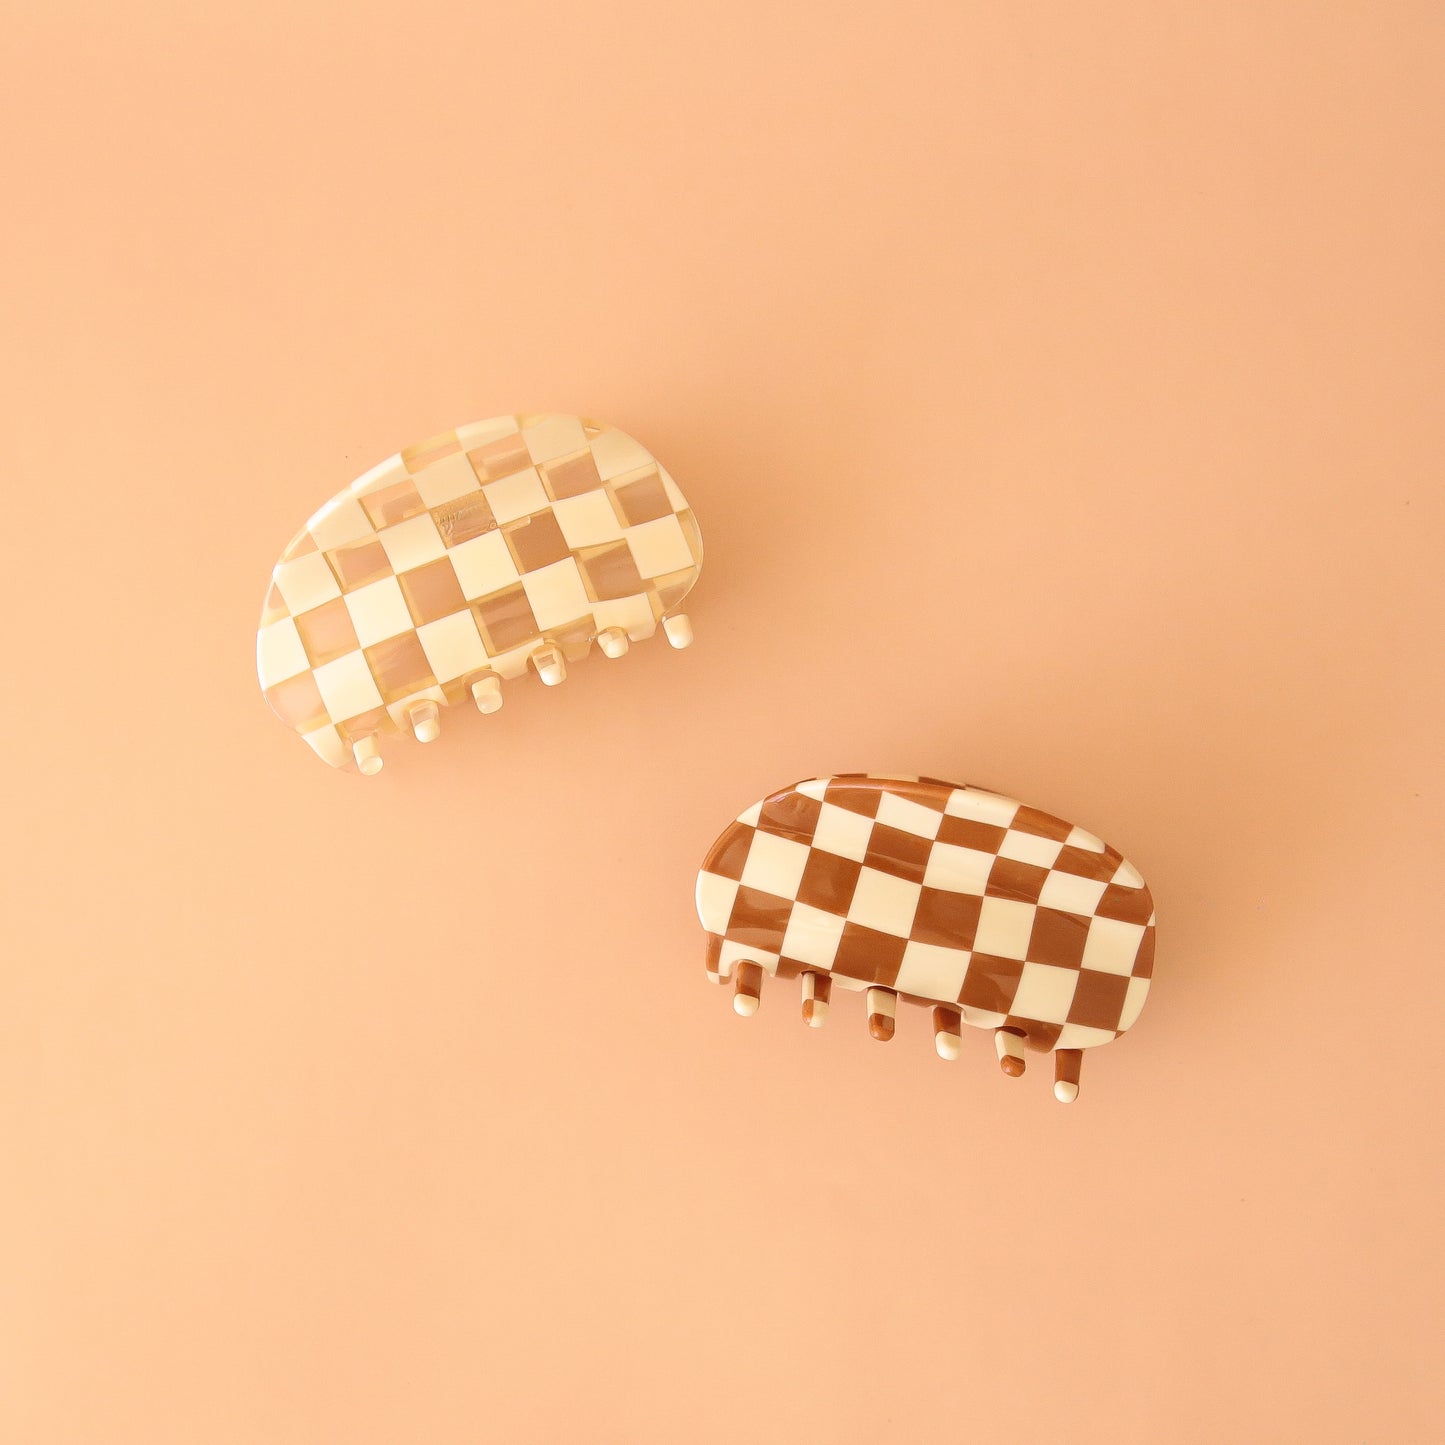 On a peachy background is two claw clips with a rounded edge design. One of the claw clips has an ivory and clear checker pattern while the other clip has a brown and ivory checker pattern.